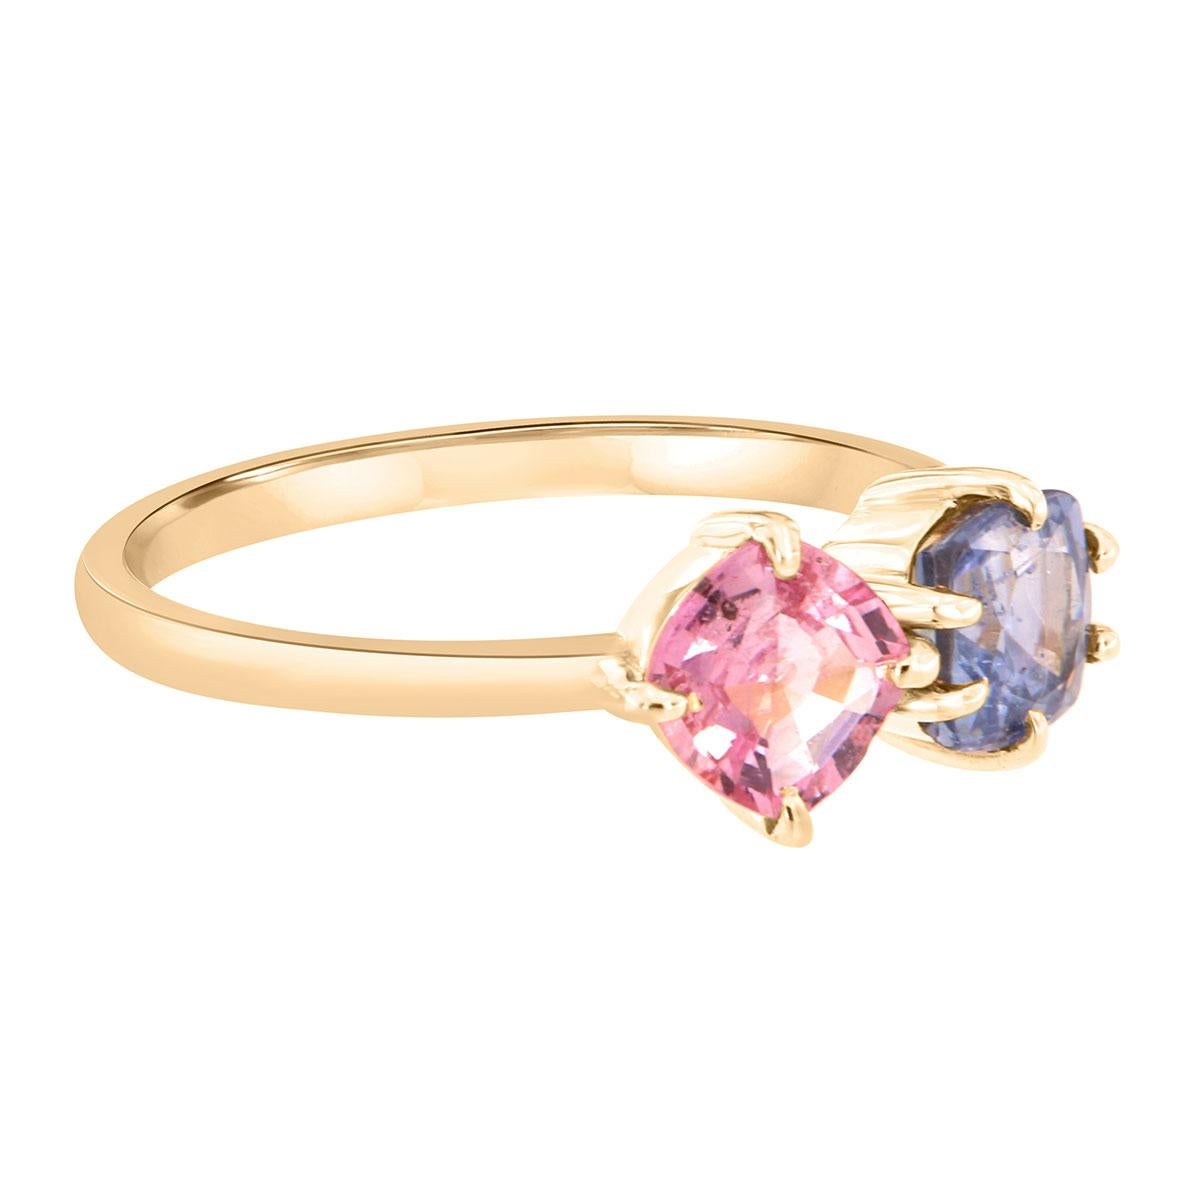 This One-Of-A-Kind 14k yellow gold ring features two natural unheated Sri-Lankan sapphires. Both sapphires exhibit excellent luster. The pink sapphire is cushion-shaped and  0.78 carats. The Blue Sapphire is a Cushion shape and weight of 0.97 Carat.